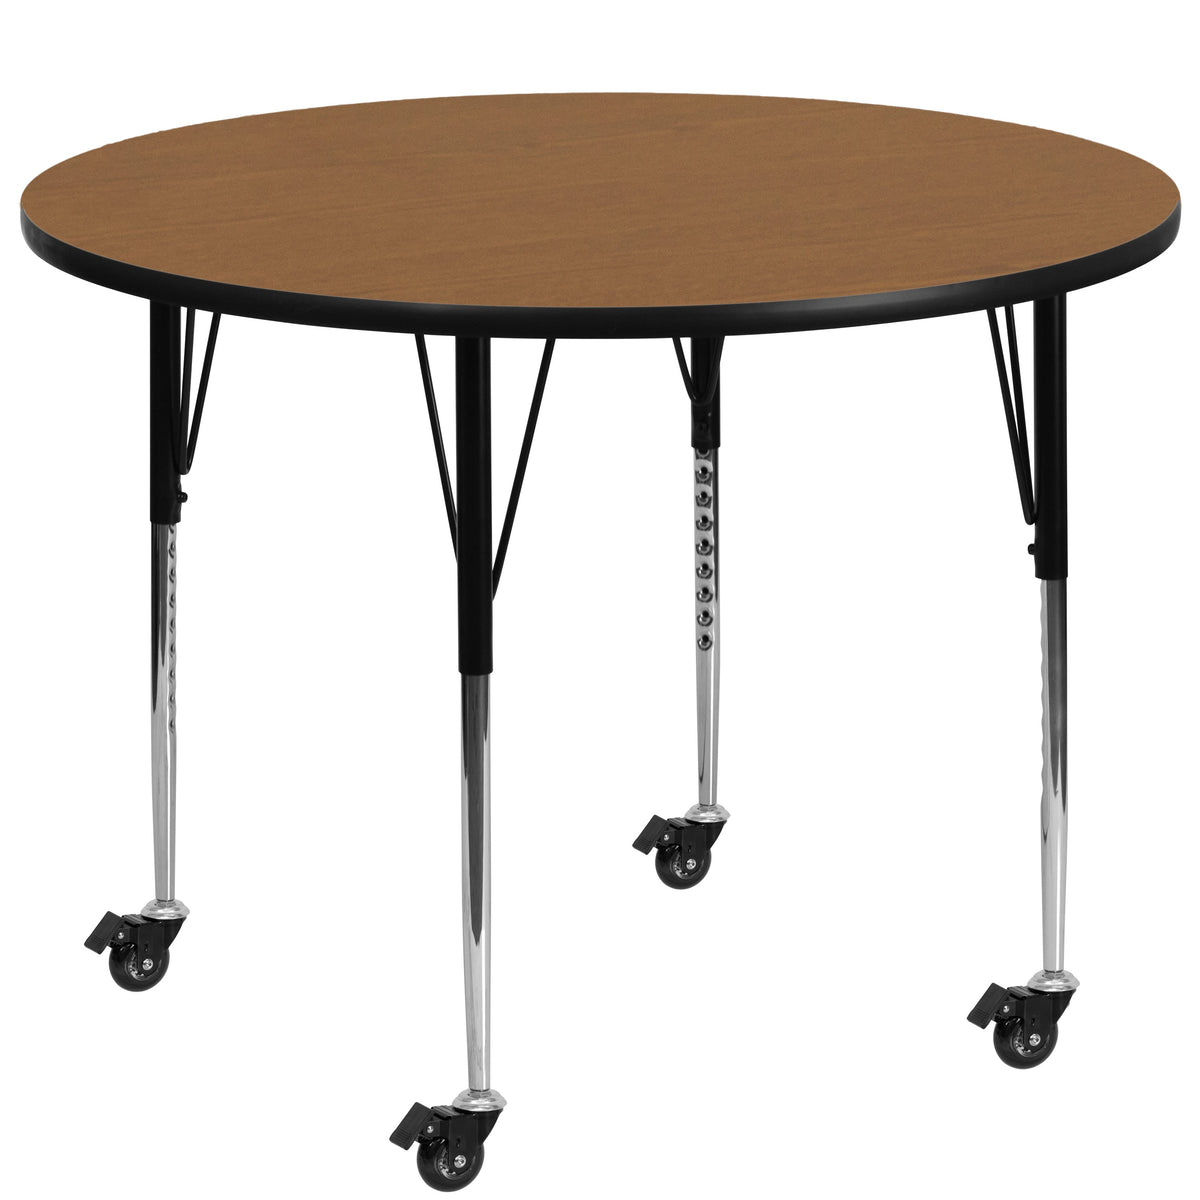 Oak |#| Mobile 60inch Round Oak Thermal Laminate Activity Table - Height Adjustable Legs